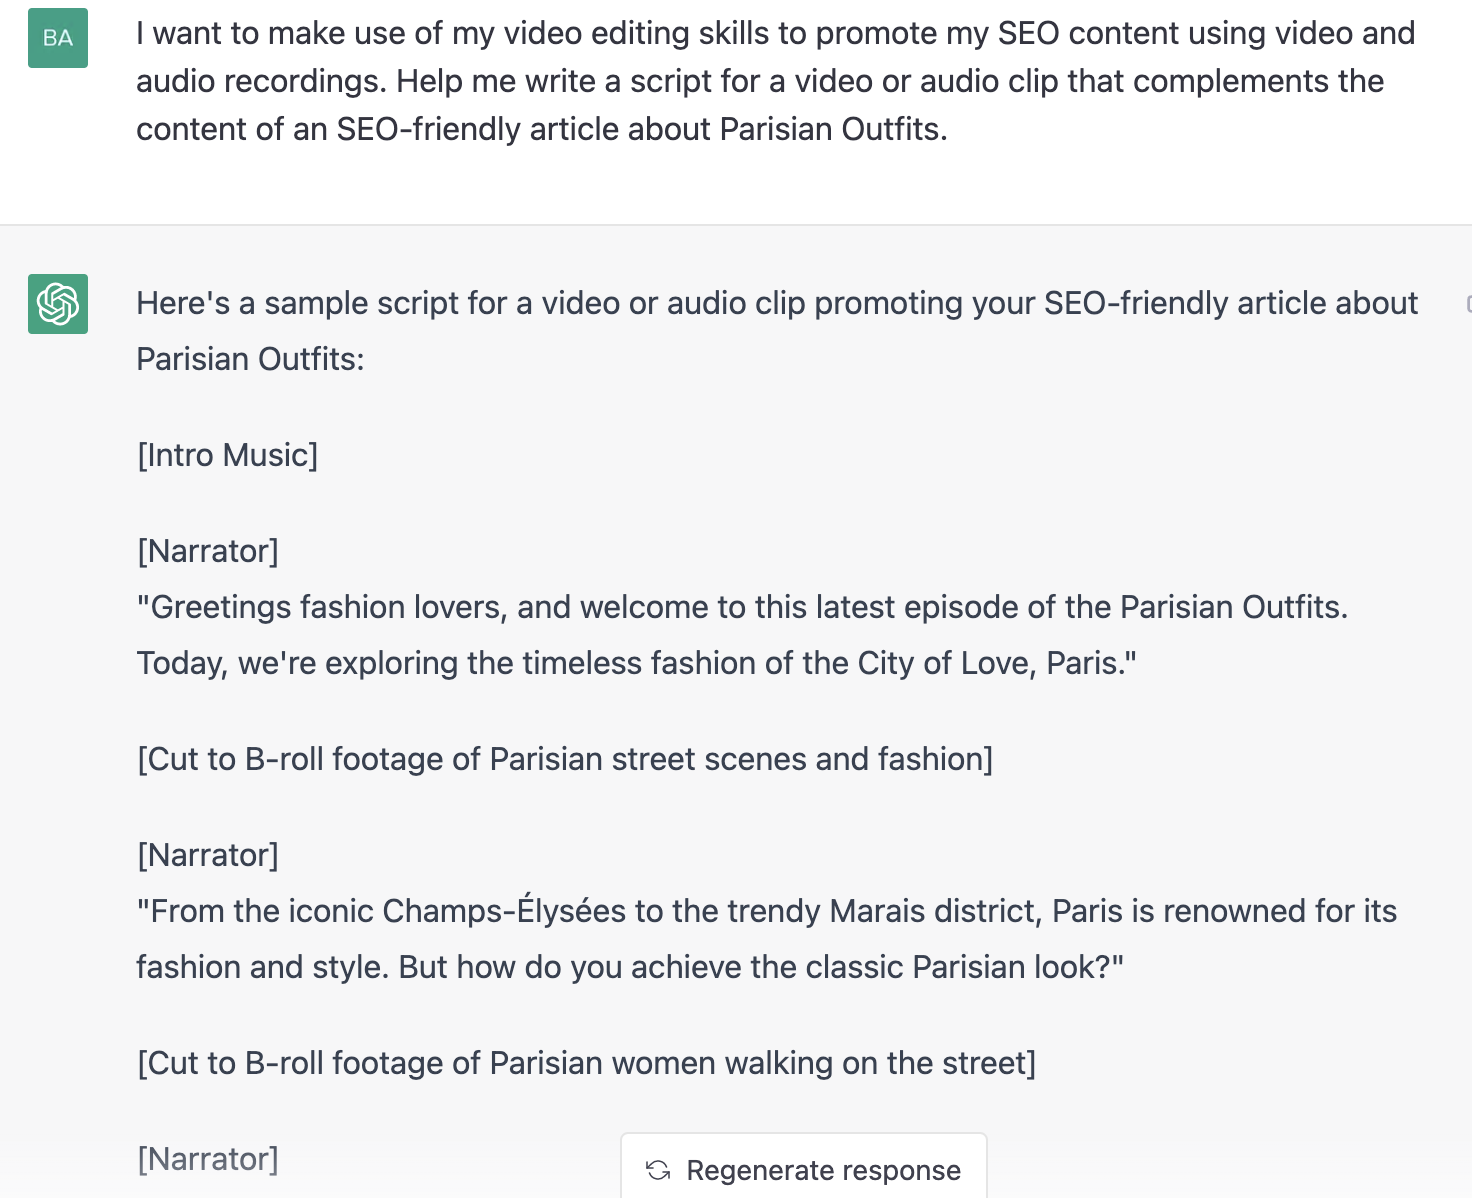 ChatGPT prompt about writing a script for a video or audio clip that complements the content of Parisian Outfits